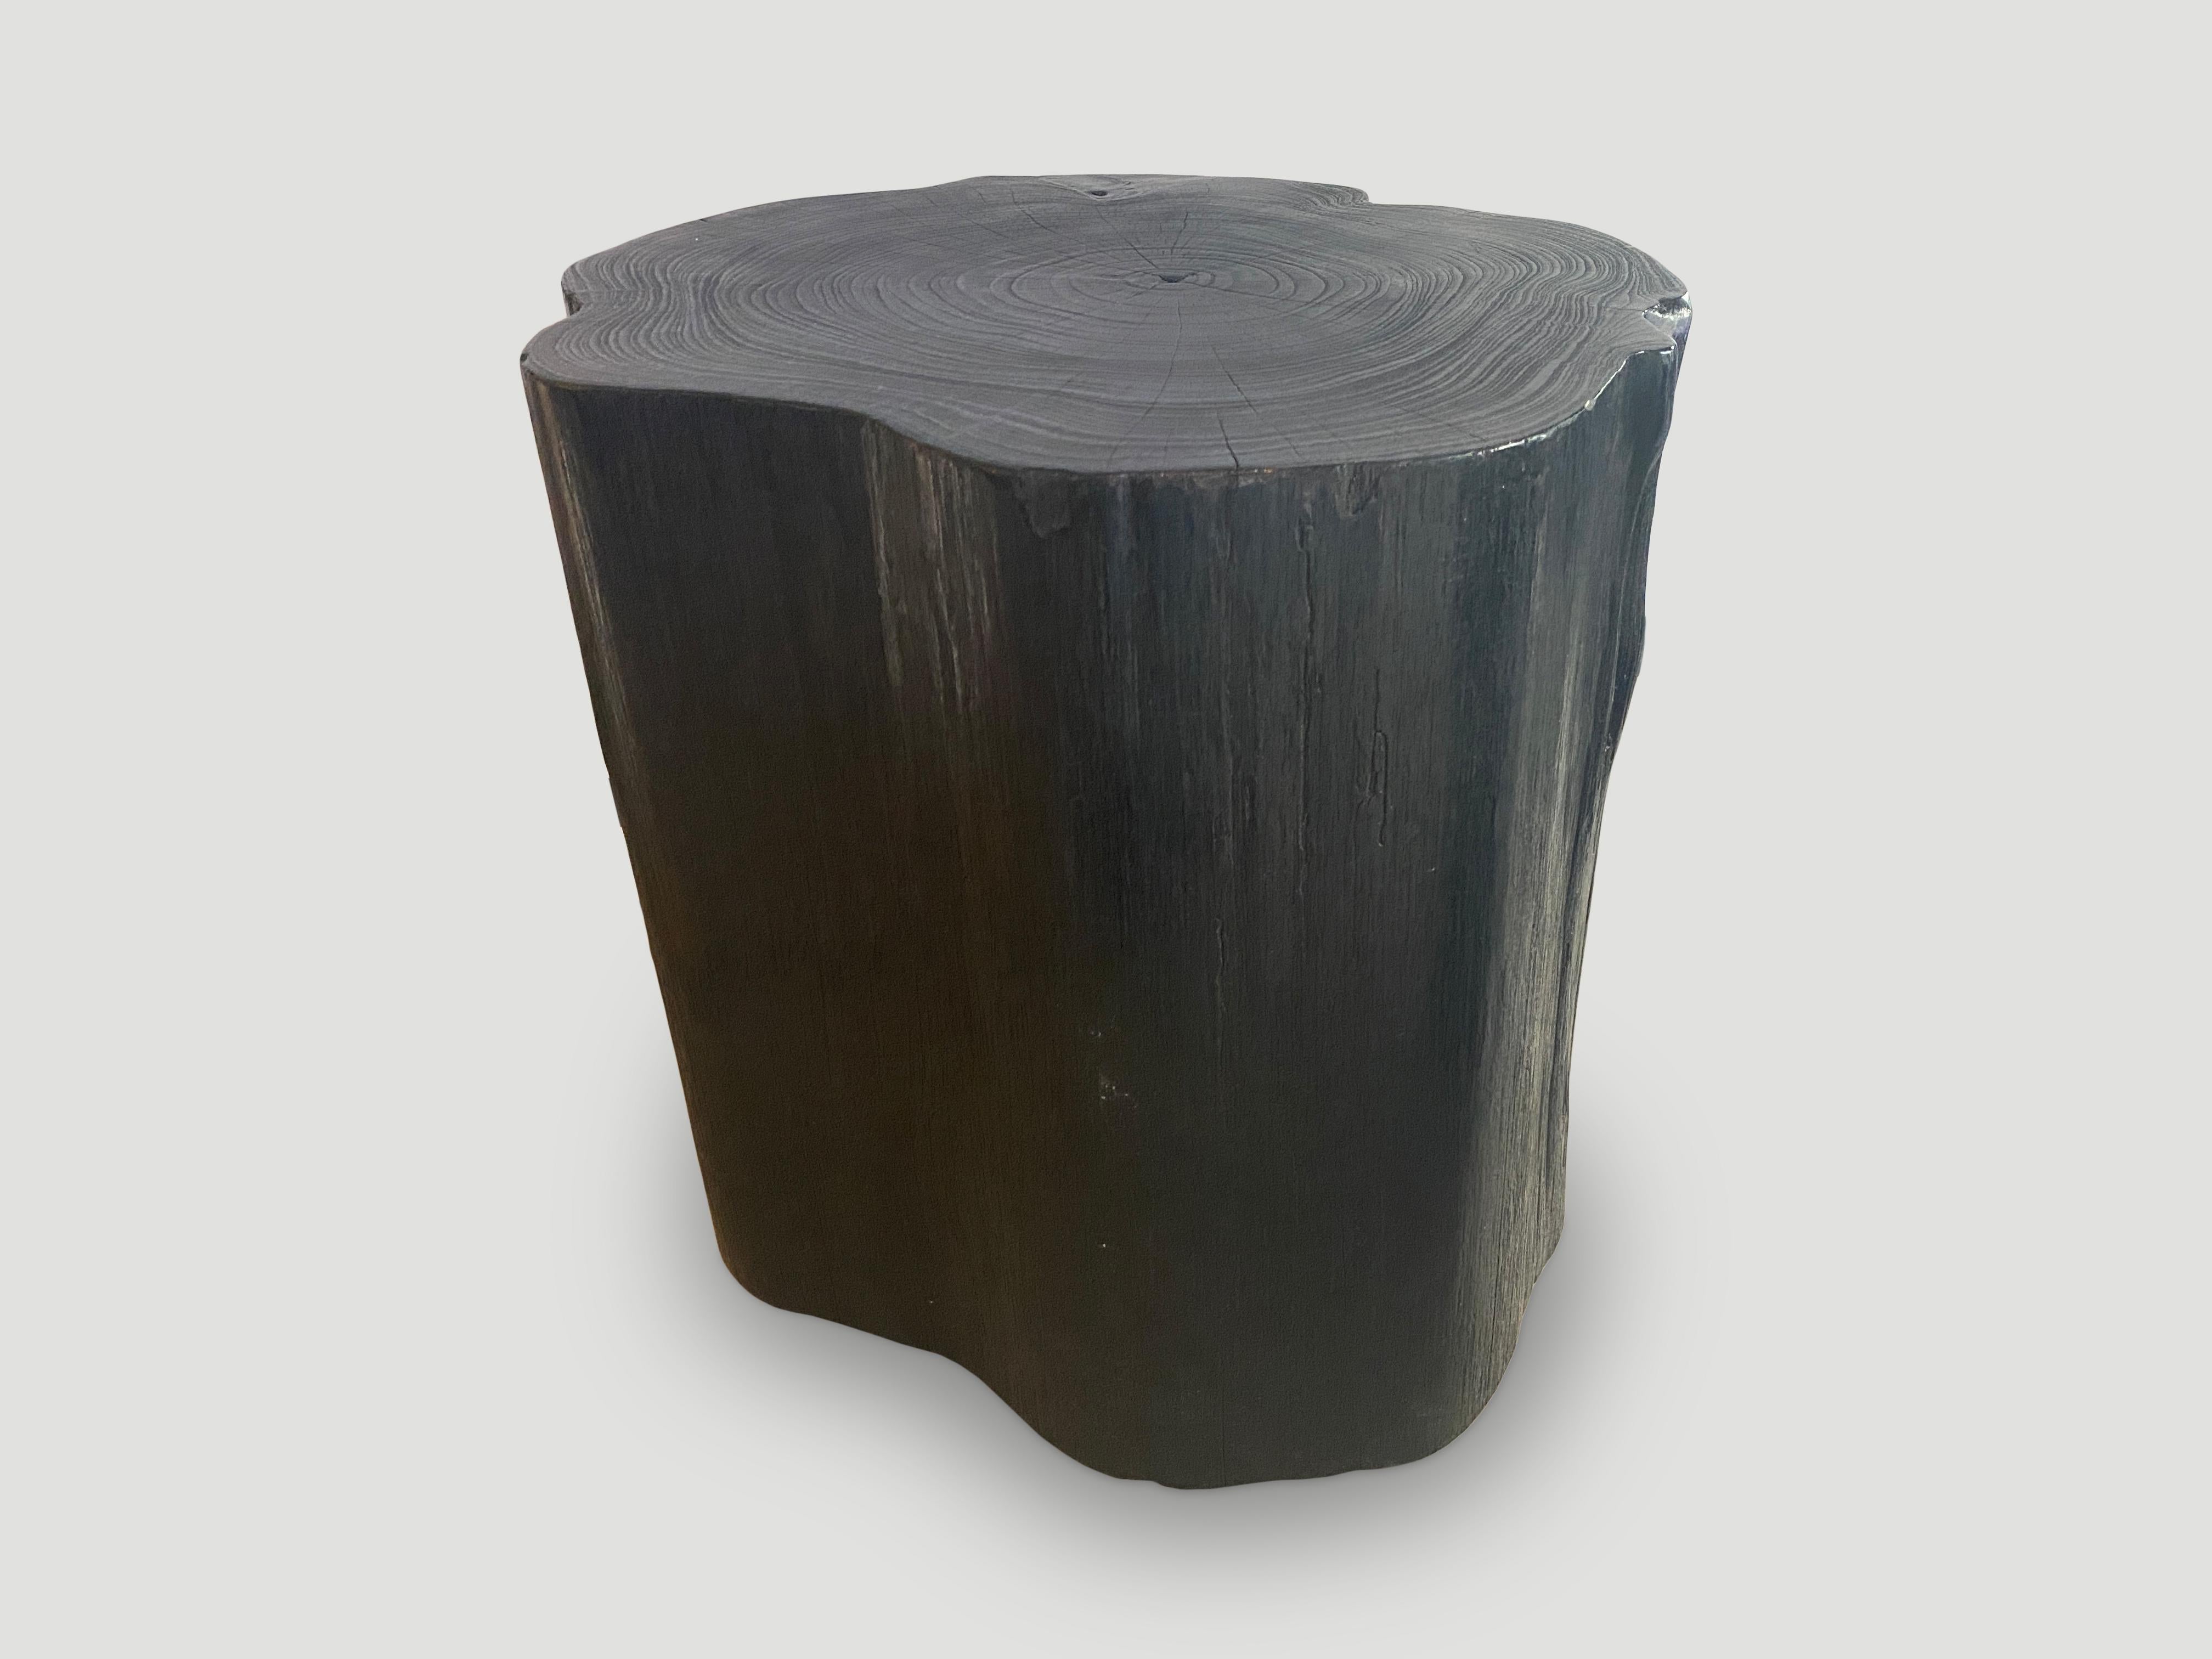 Large scale solid reclaimed teak wood side table. Charred, sanded and sealed revealing the beautiful wood grain. Custom stains and finishes available.

The Triple Burnt Collection represents a unique line of modern furniture made from solid